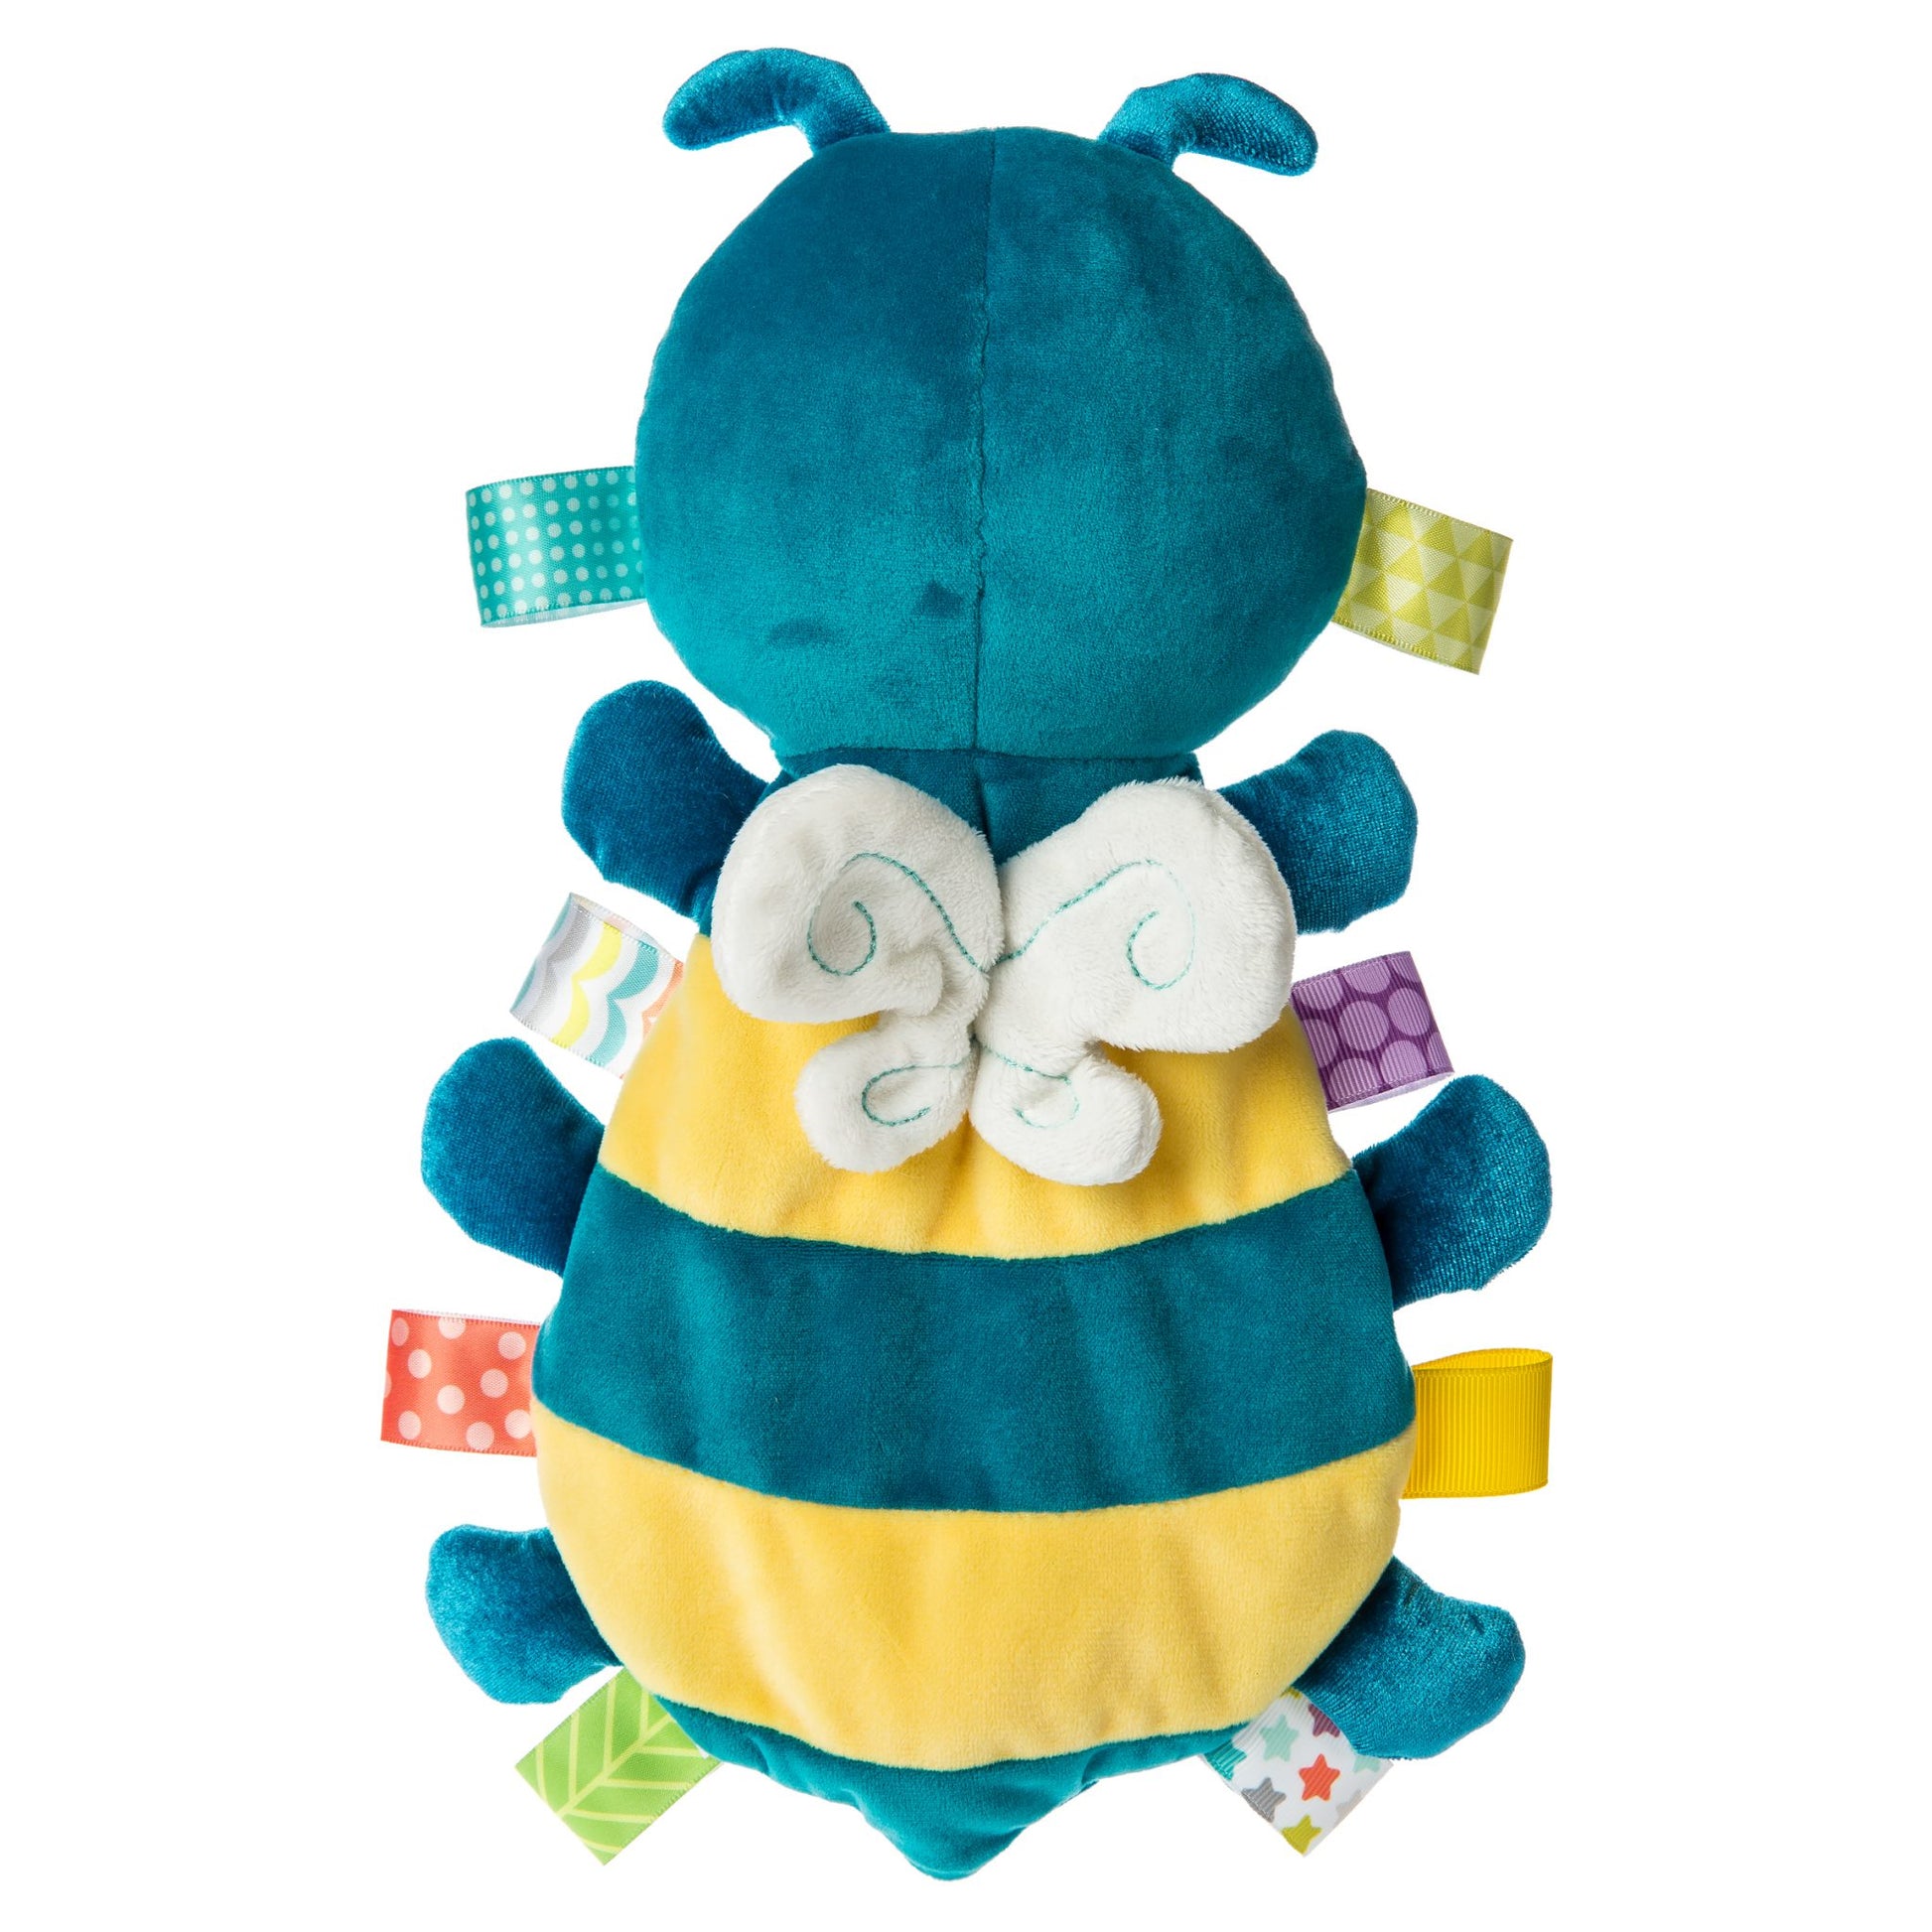 Taggies Fuzzy Buzzy Bee Lovey  - Doodlebug's Children's Boutique